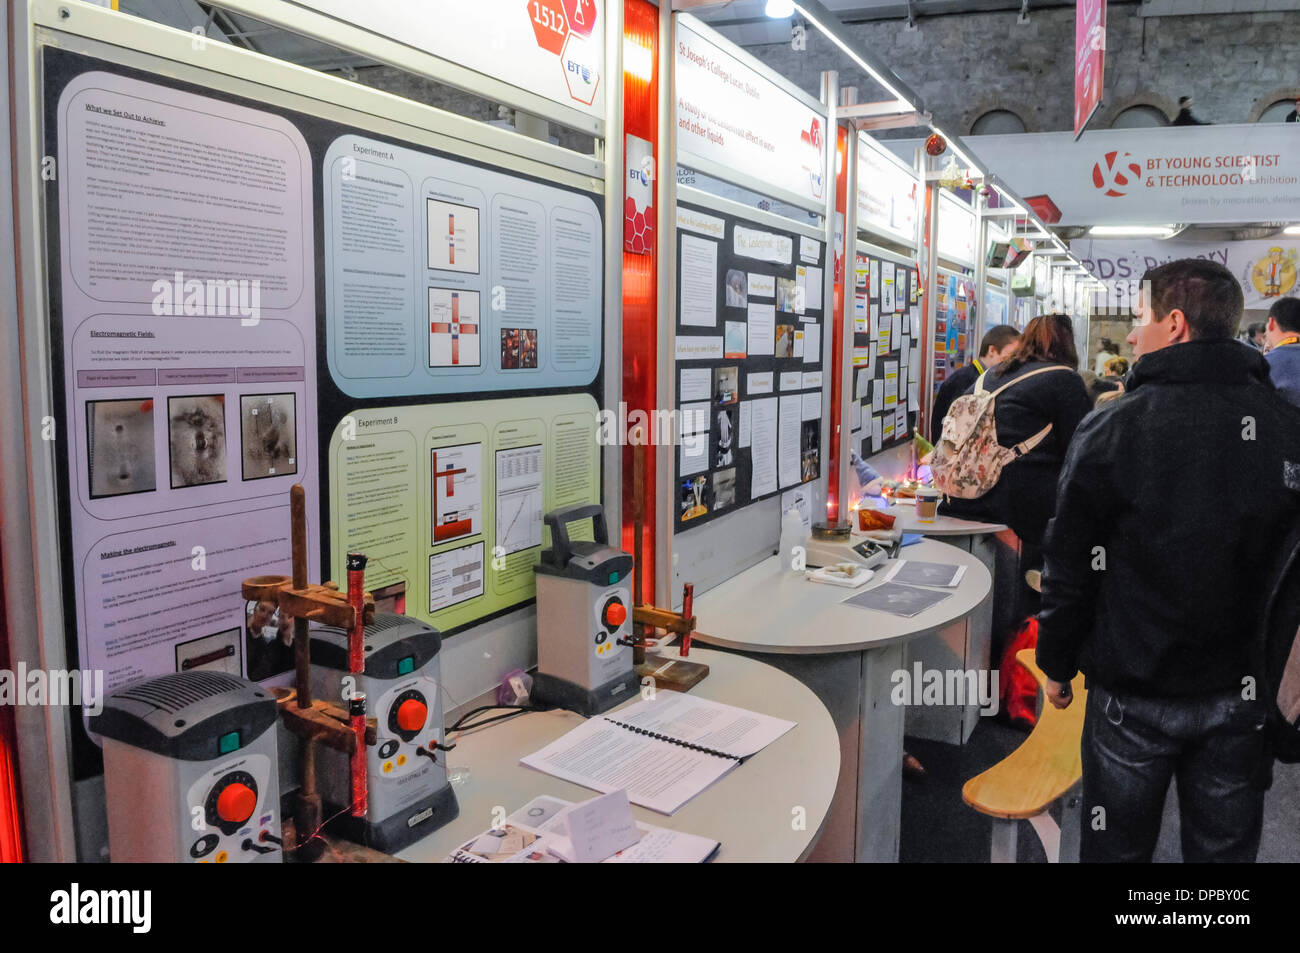 Dublin, Ireland. 11 Jan 2014 -  Exhibits at the BT Young Science And Technology Exhibition Stock Photo